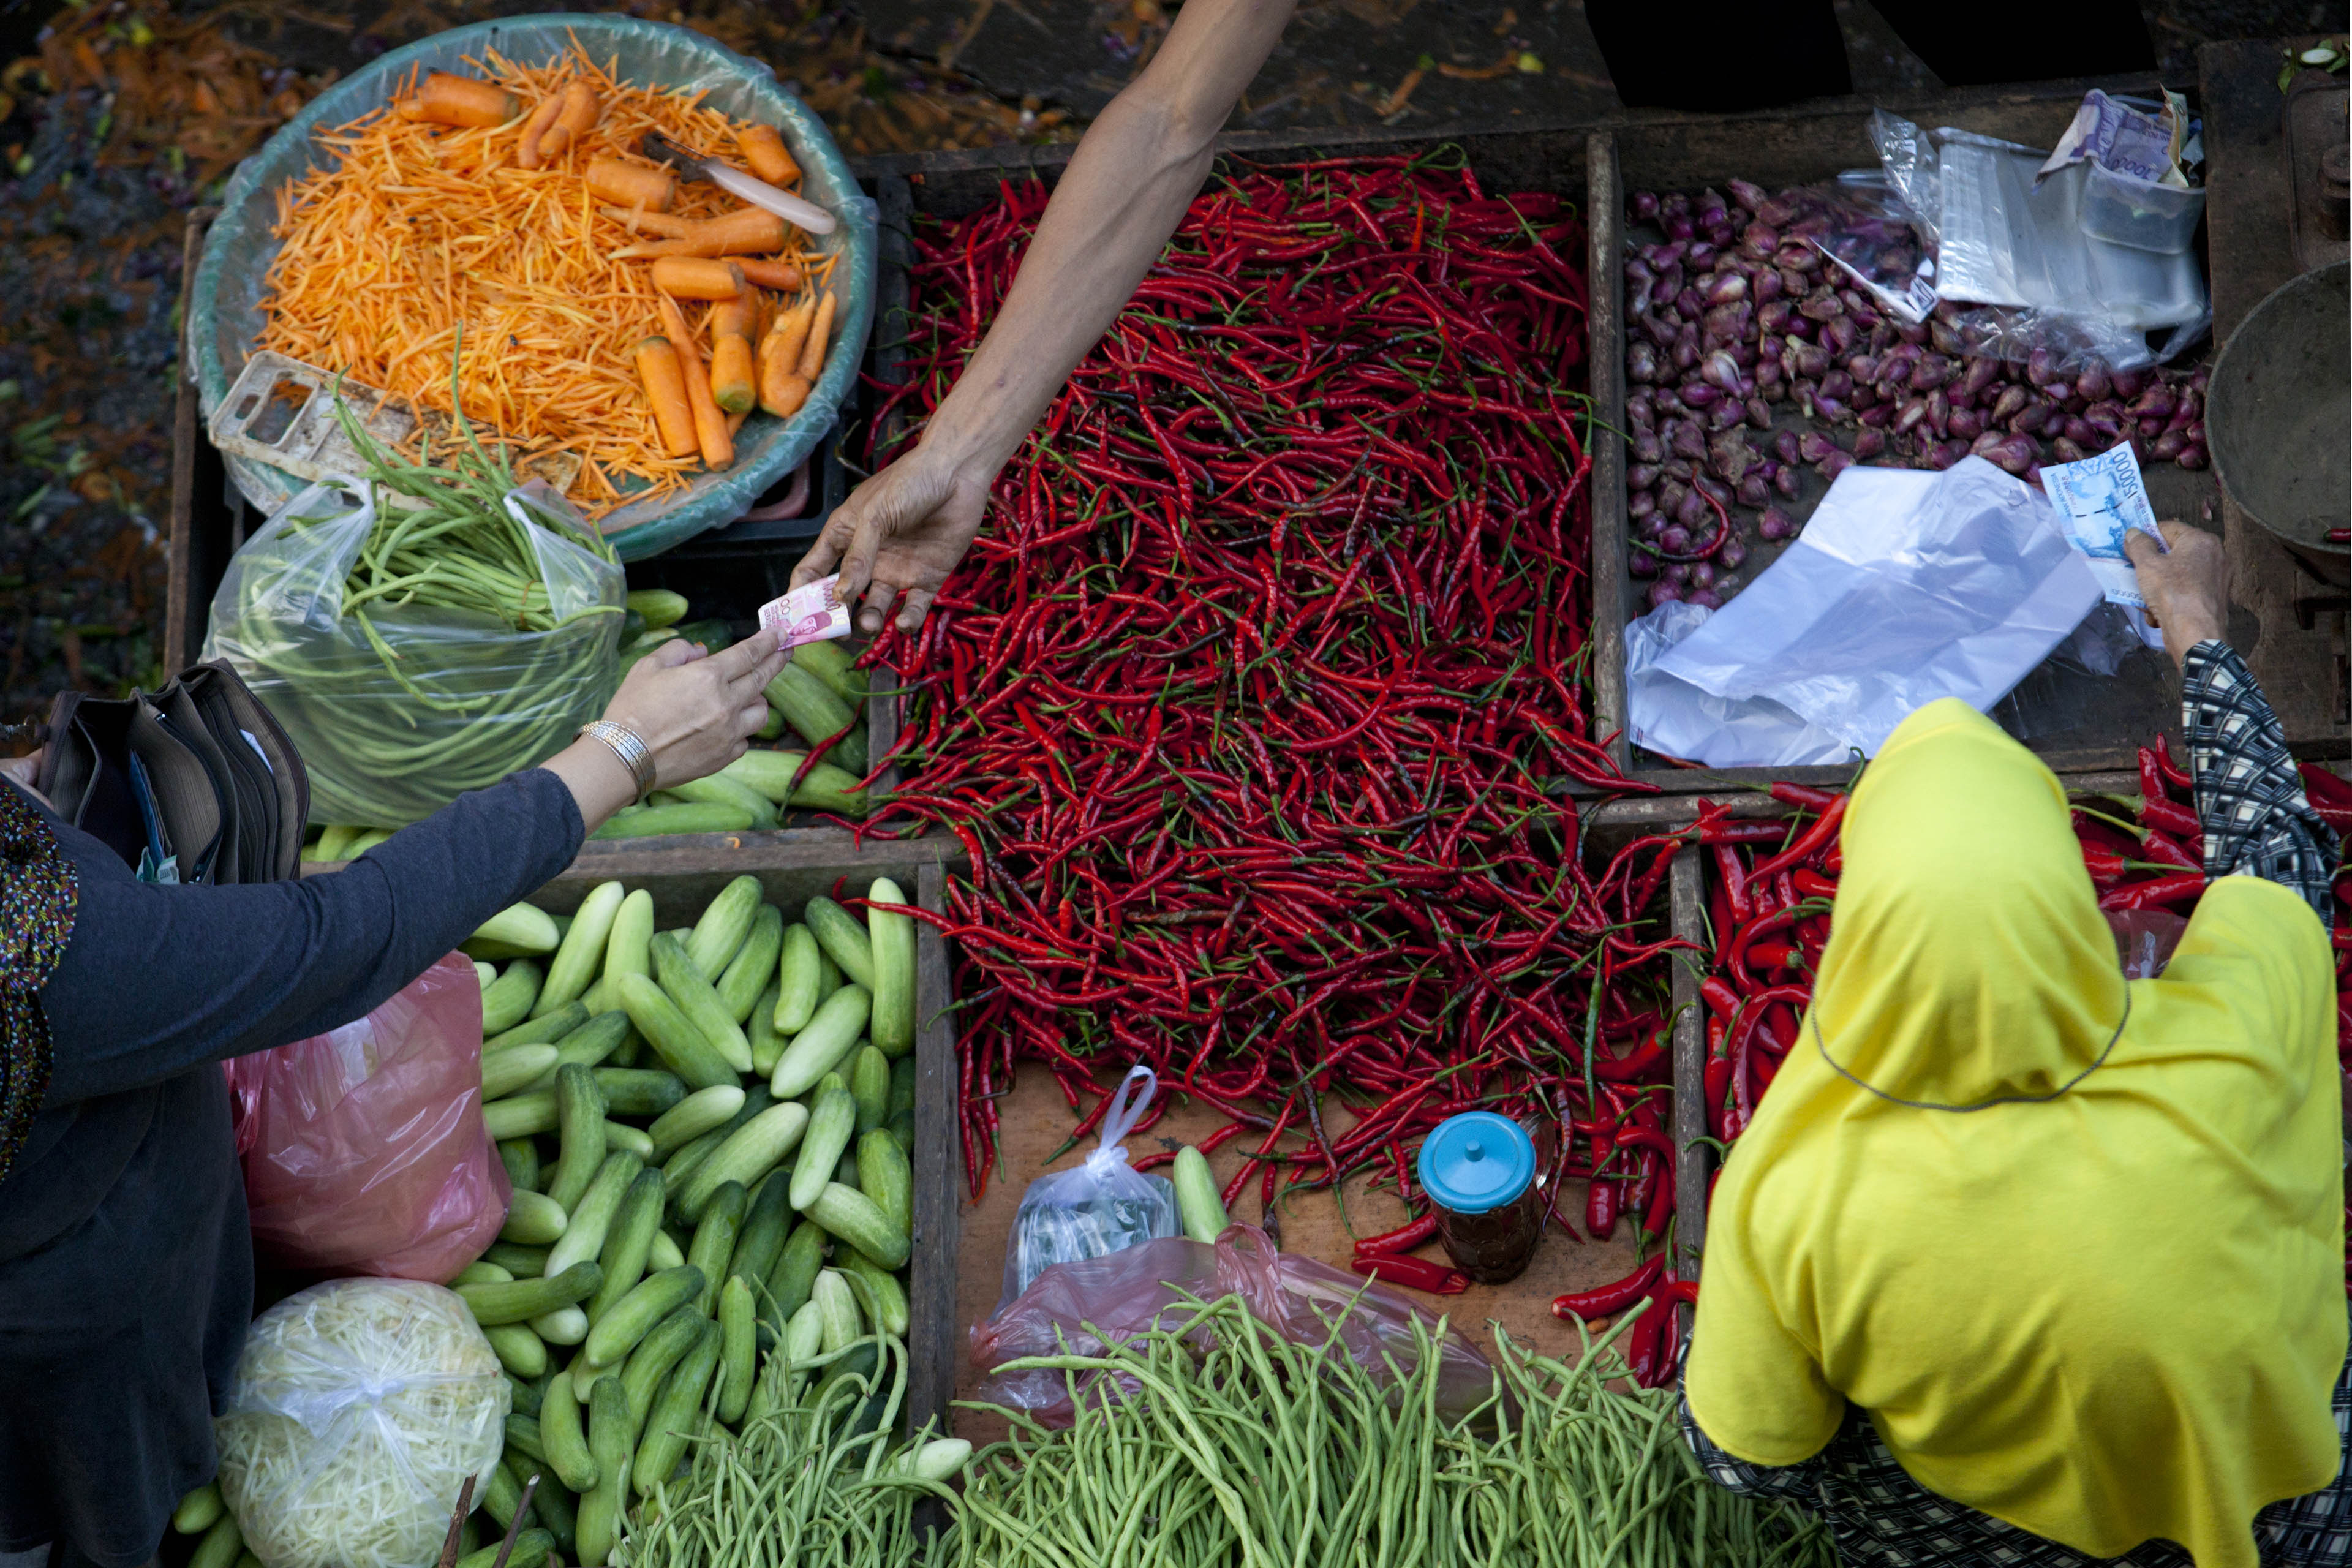 People exchanging money vegetables market stall image